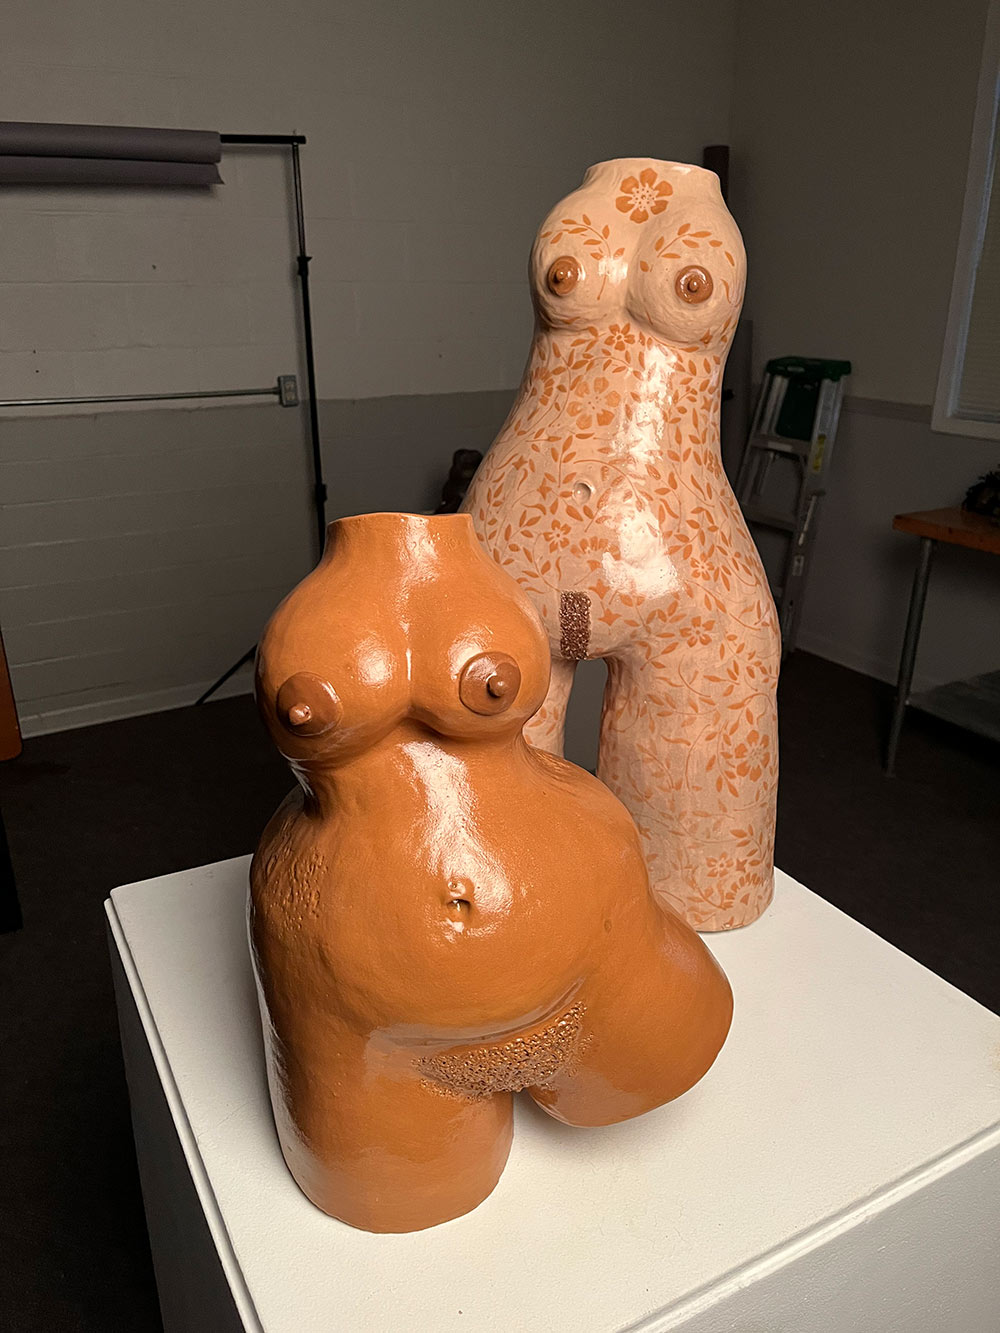 A small fleshy brown sculpture with nipple and belly rings and A tall fair skinned sculpture with brown floral tattoos covering the entire piece